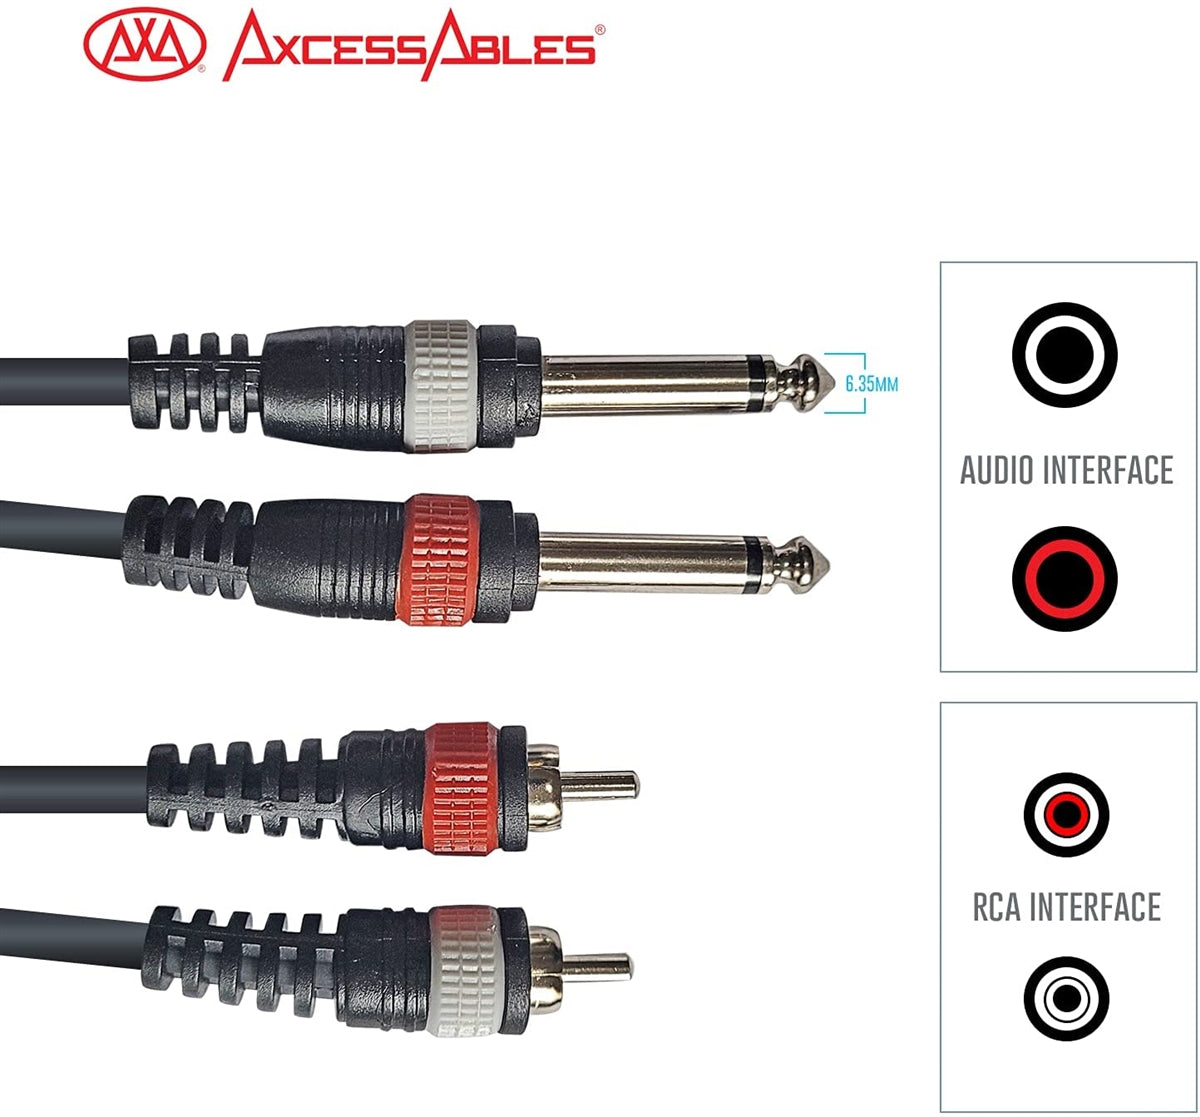 AxcessAbles Dual 1/4 Inch TS to Dual RCA Audio Interconnect Cable 6ft | Dual 6.35mm Male Jack to Dual RCA | 6ft DTRS to DRCA Unbalanced Patch Cables